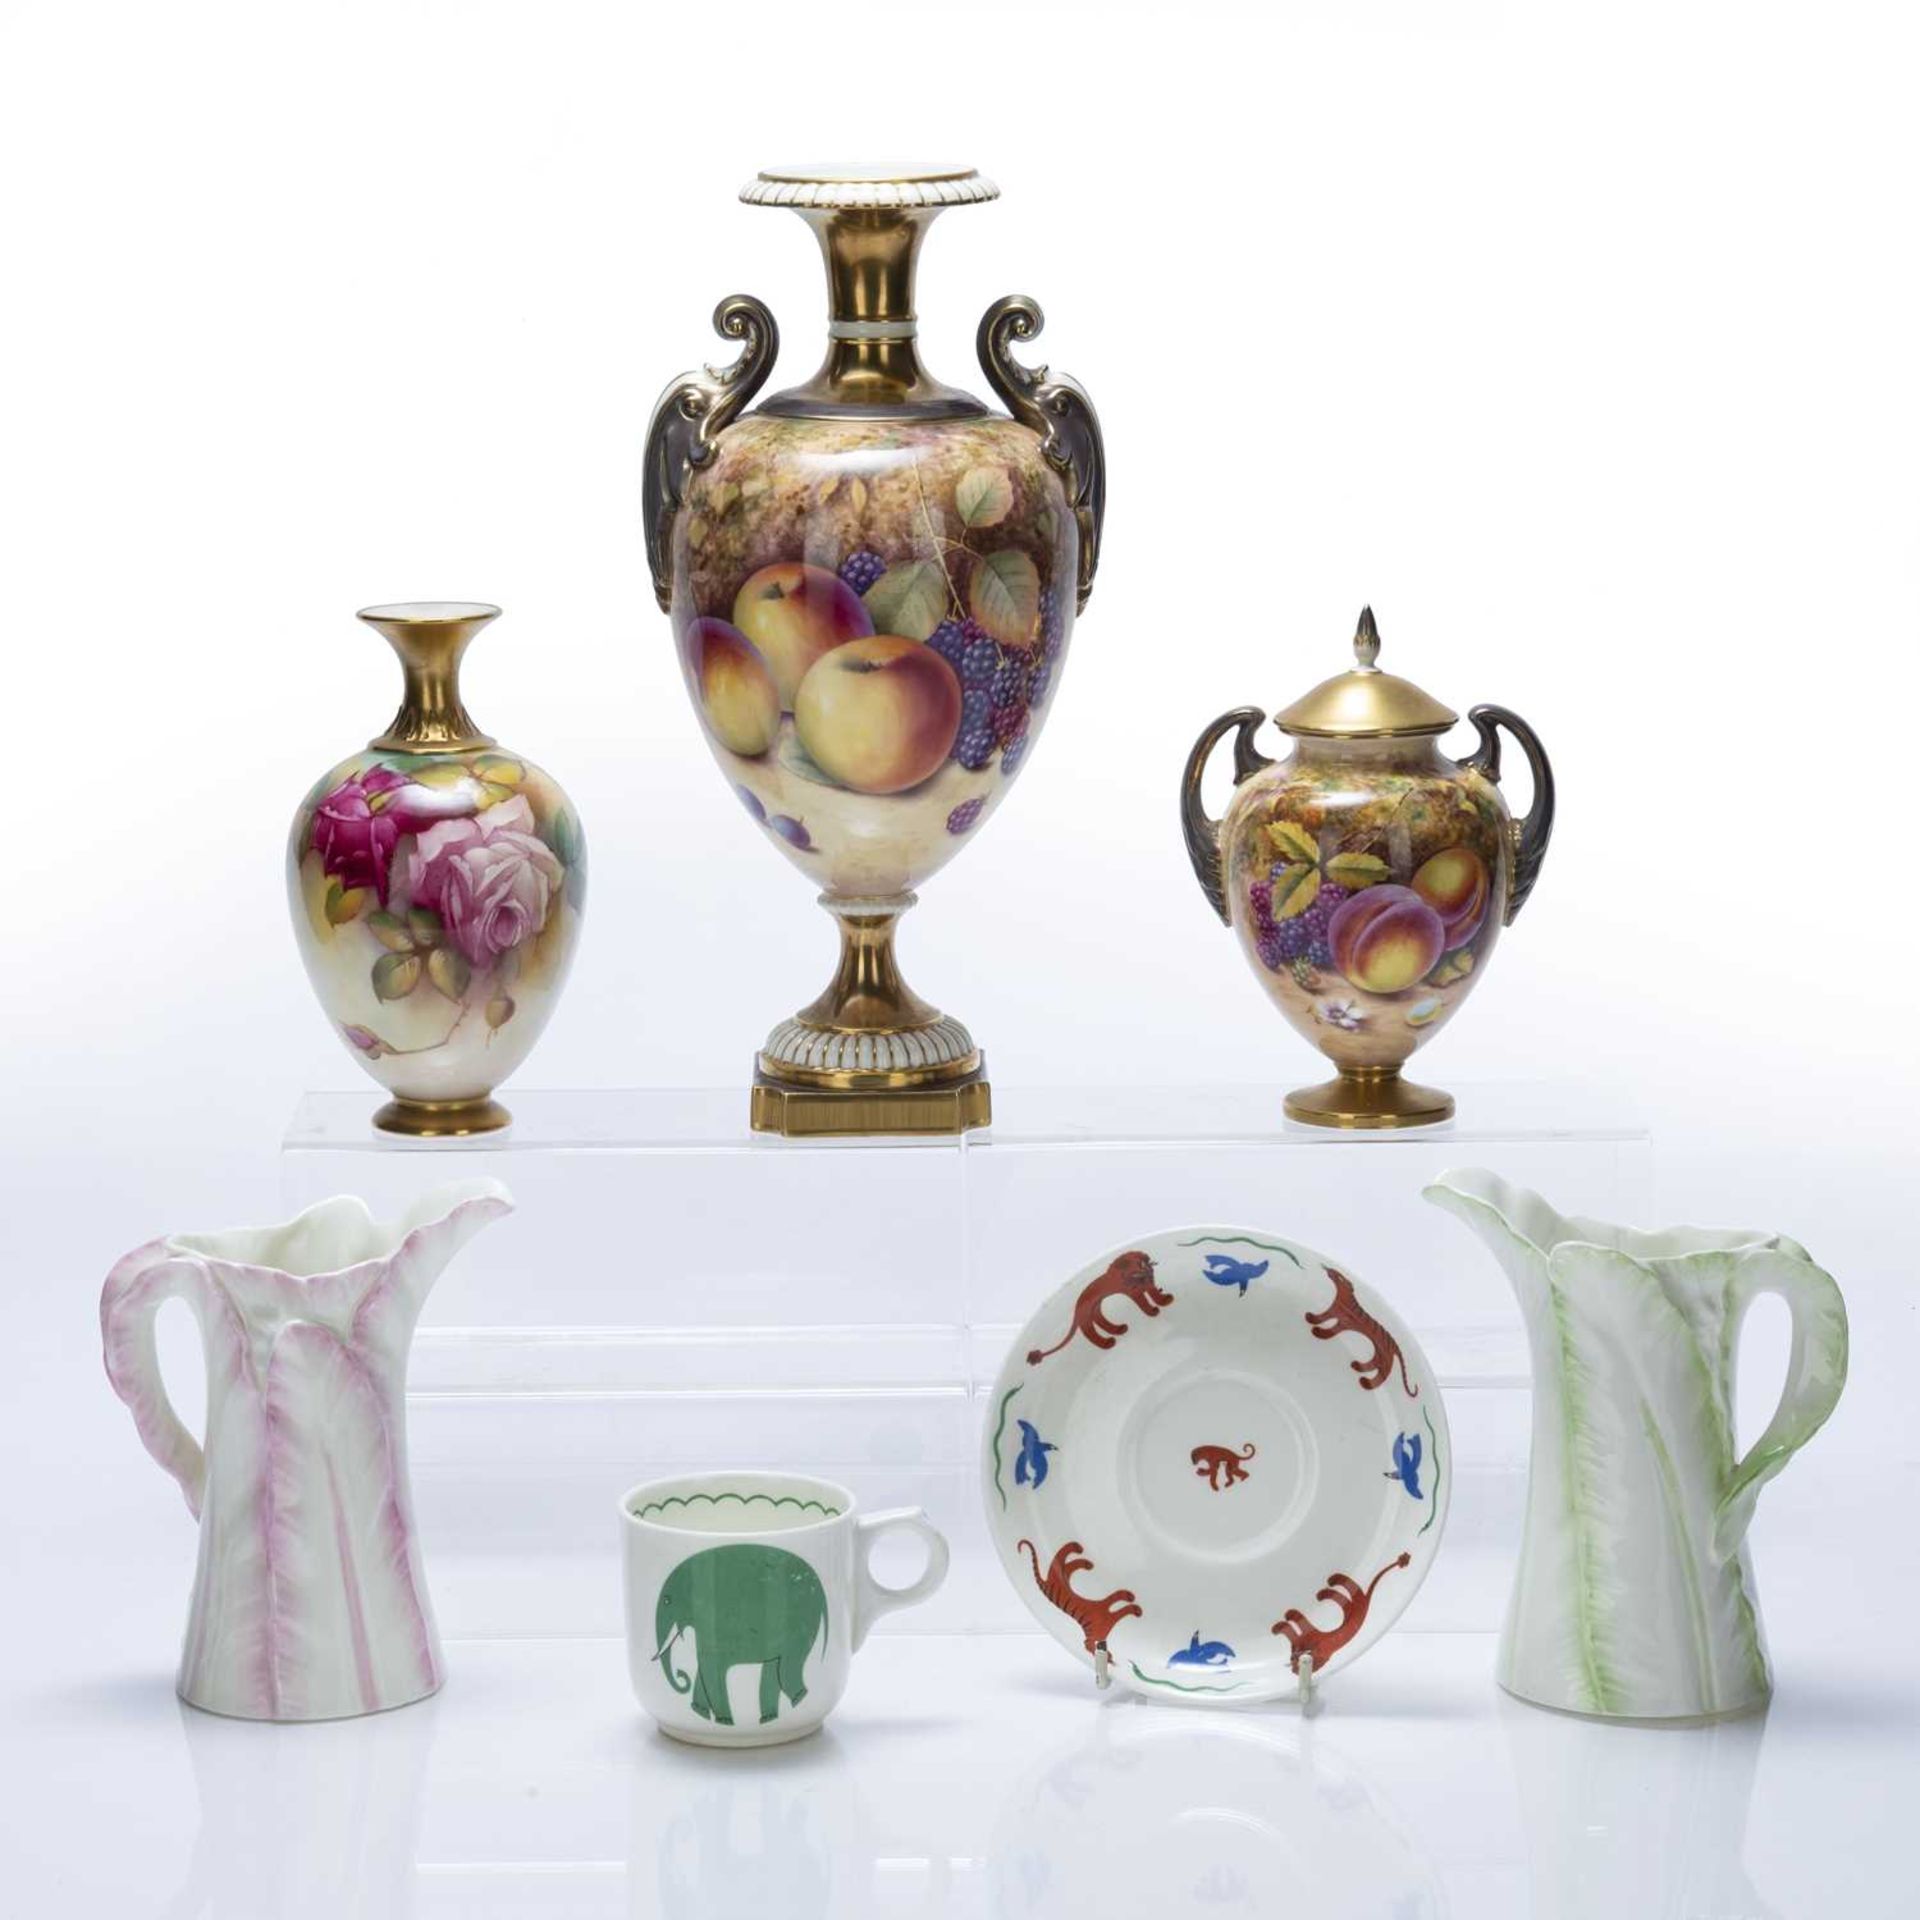 Royal Worcester collection of porcelain consisting of: P. Platt urn vase decorated with fruit,